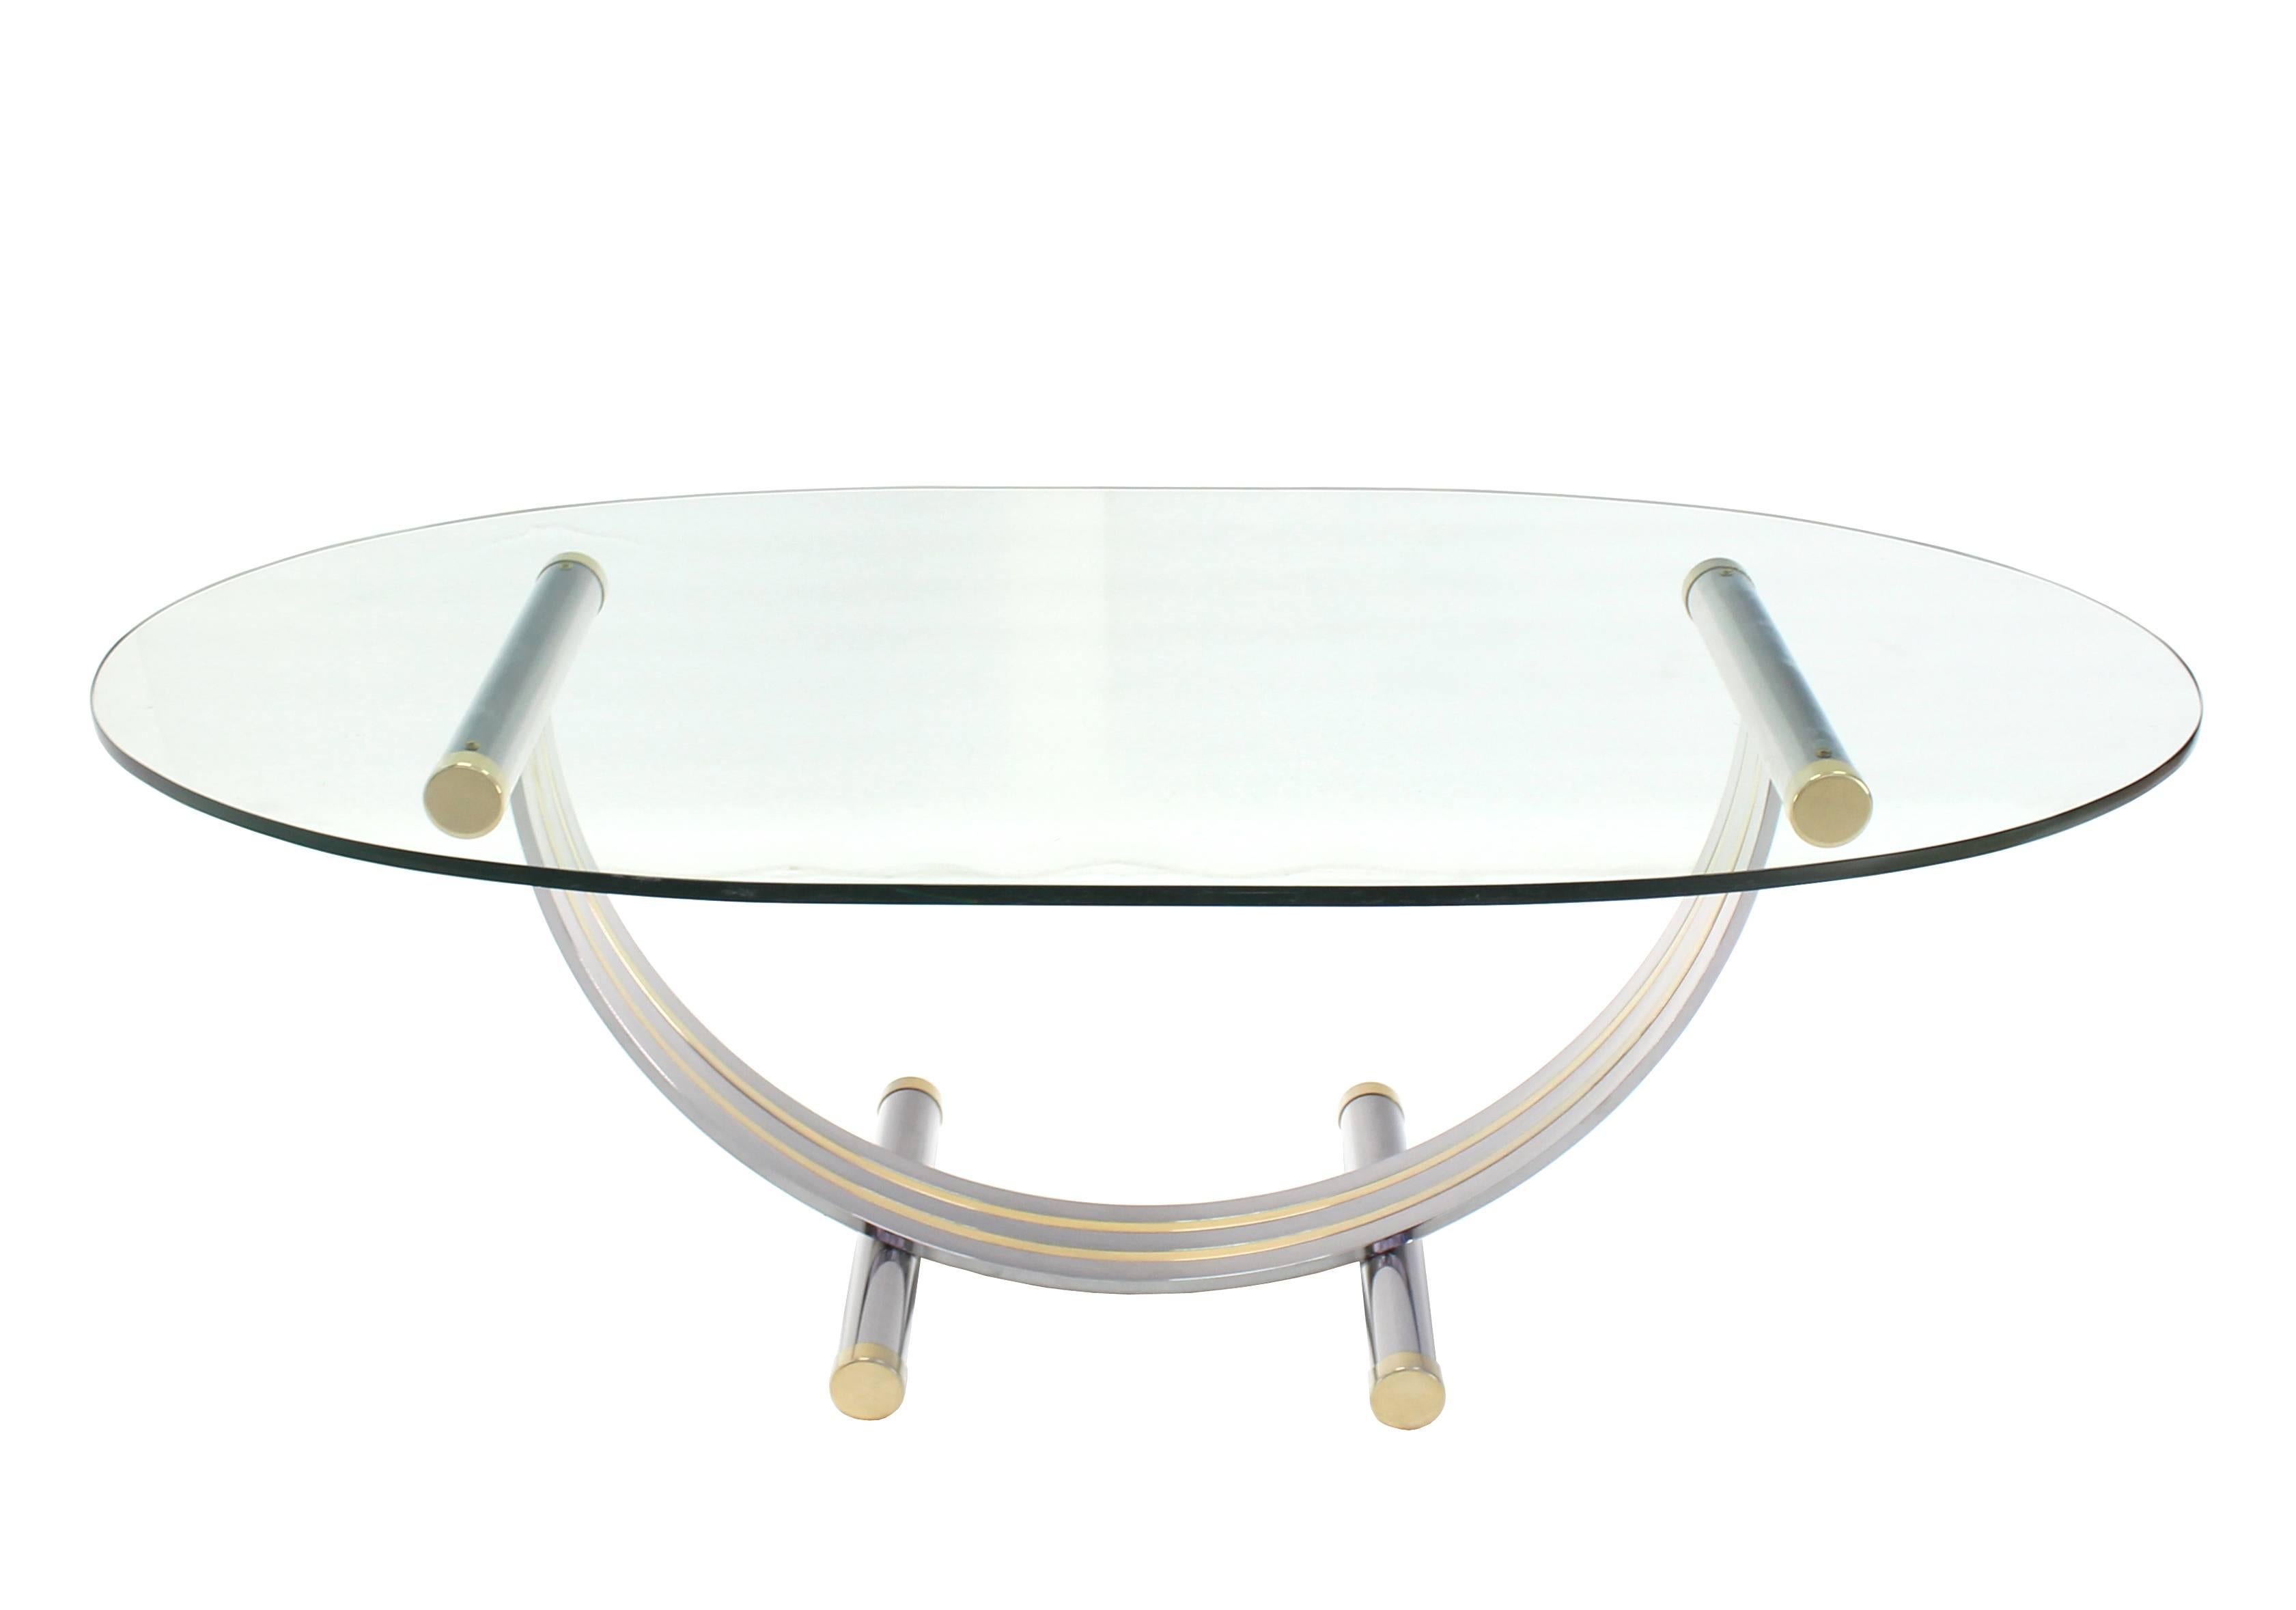 Large oval glass top dining conference table.